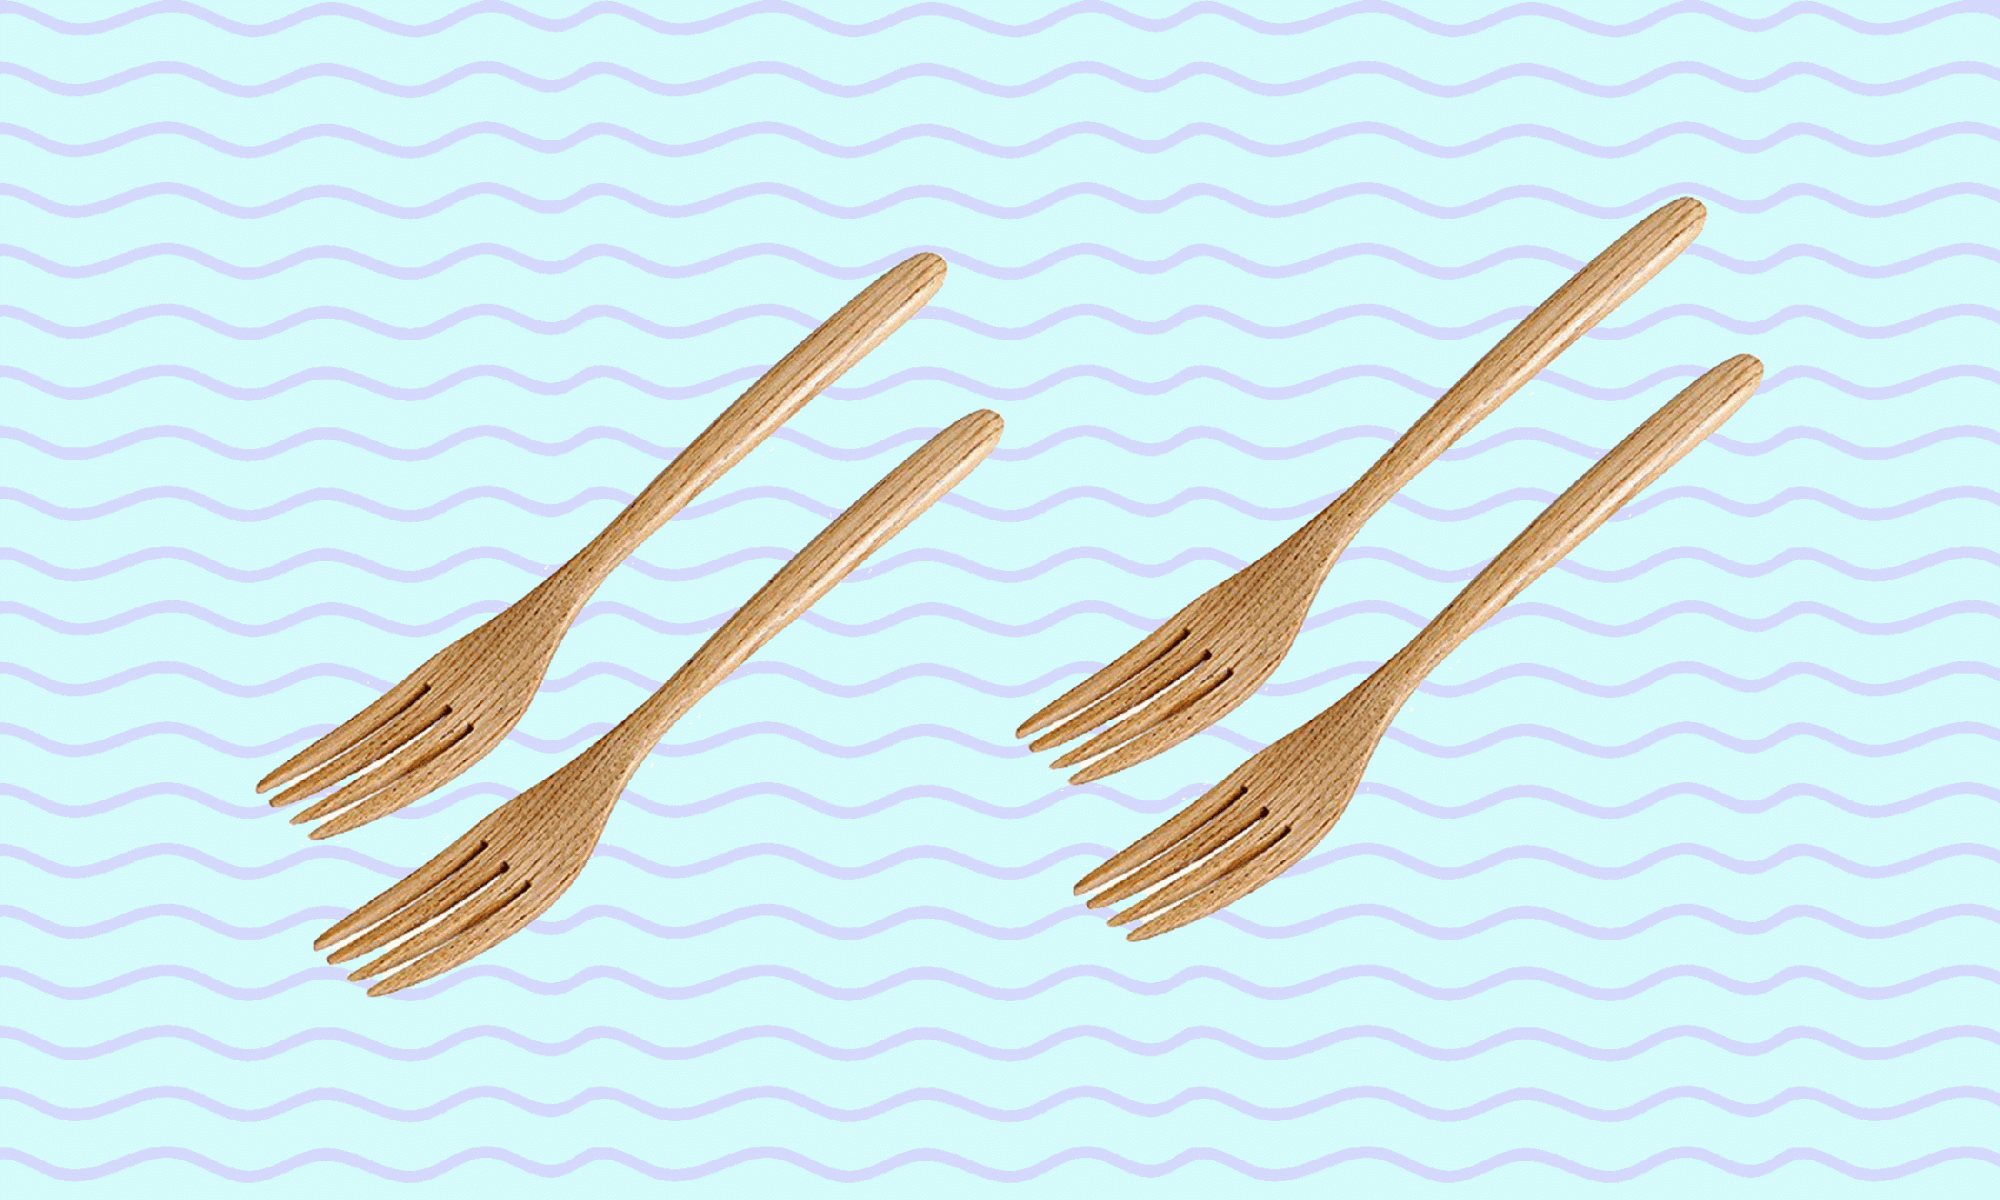 EC: The Toast Fork Will Save Your Fingers